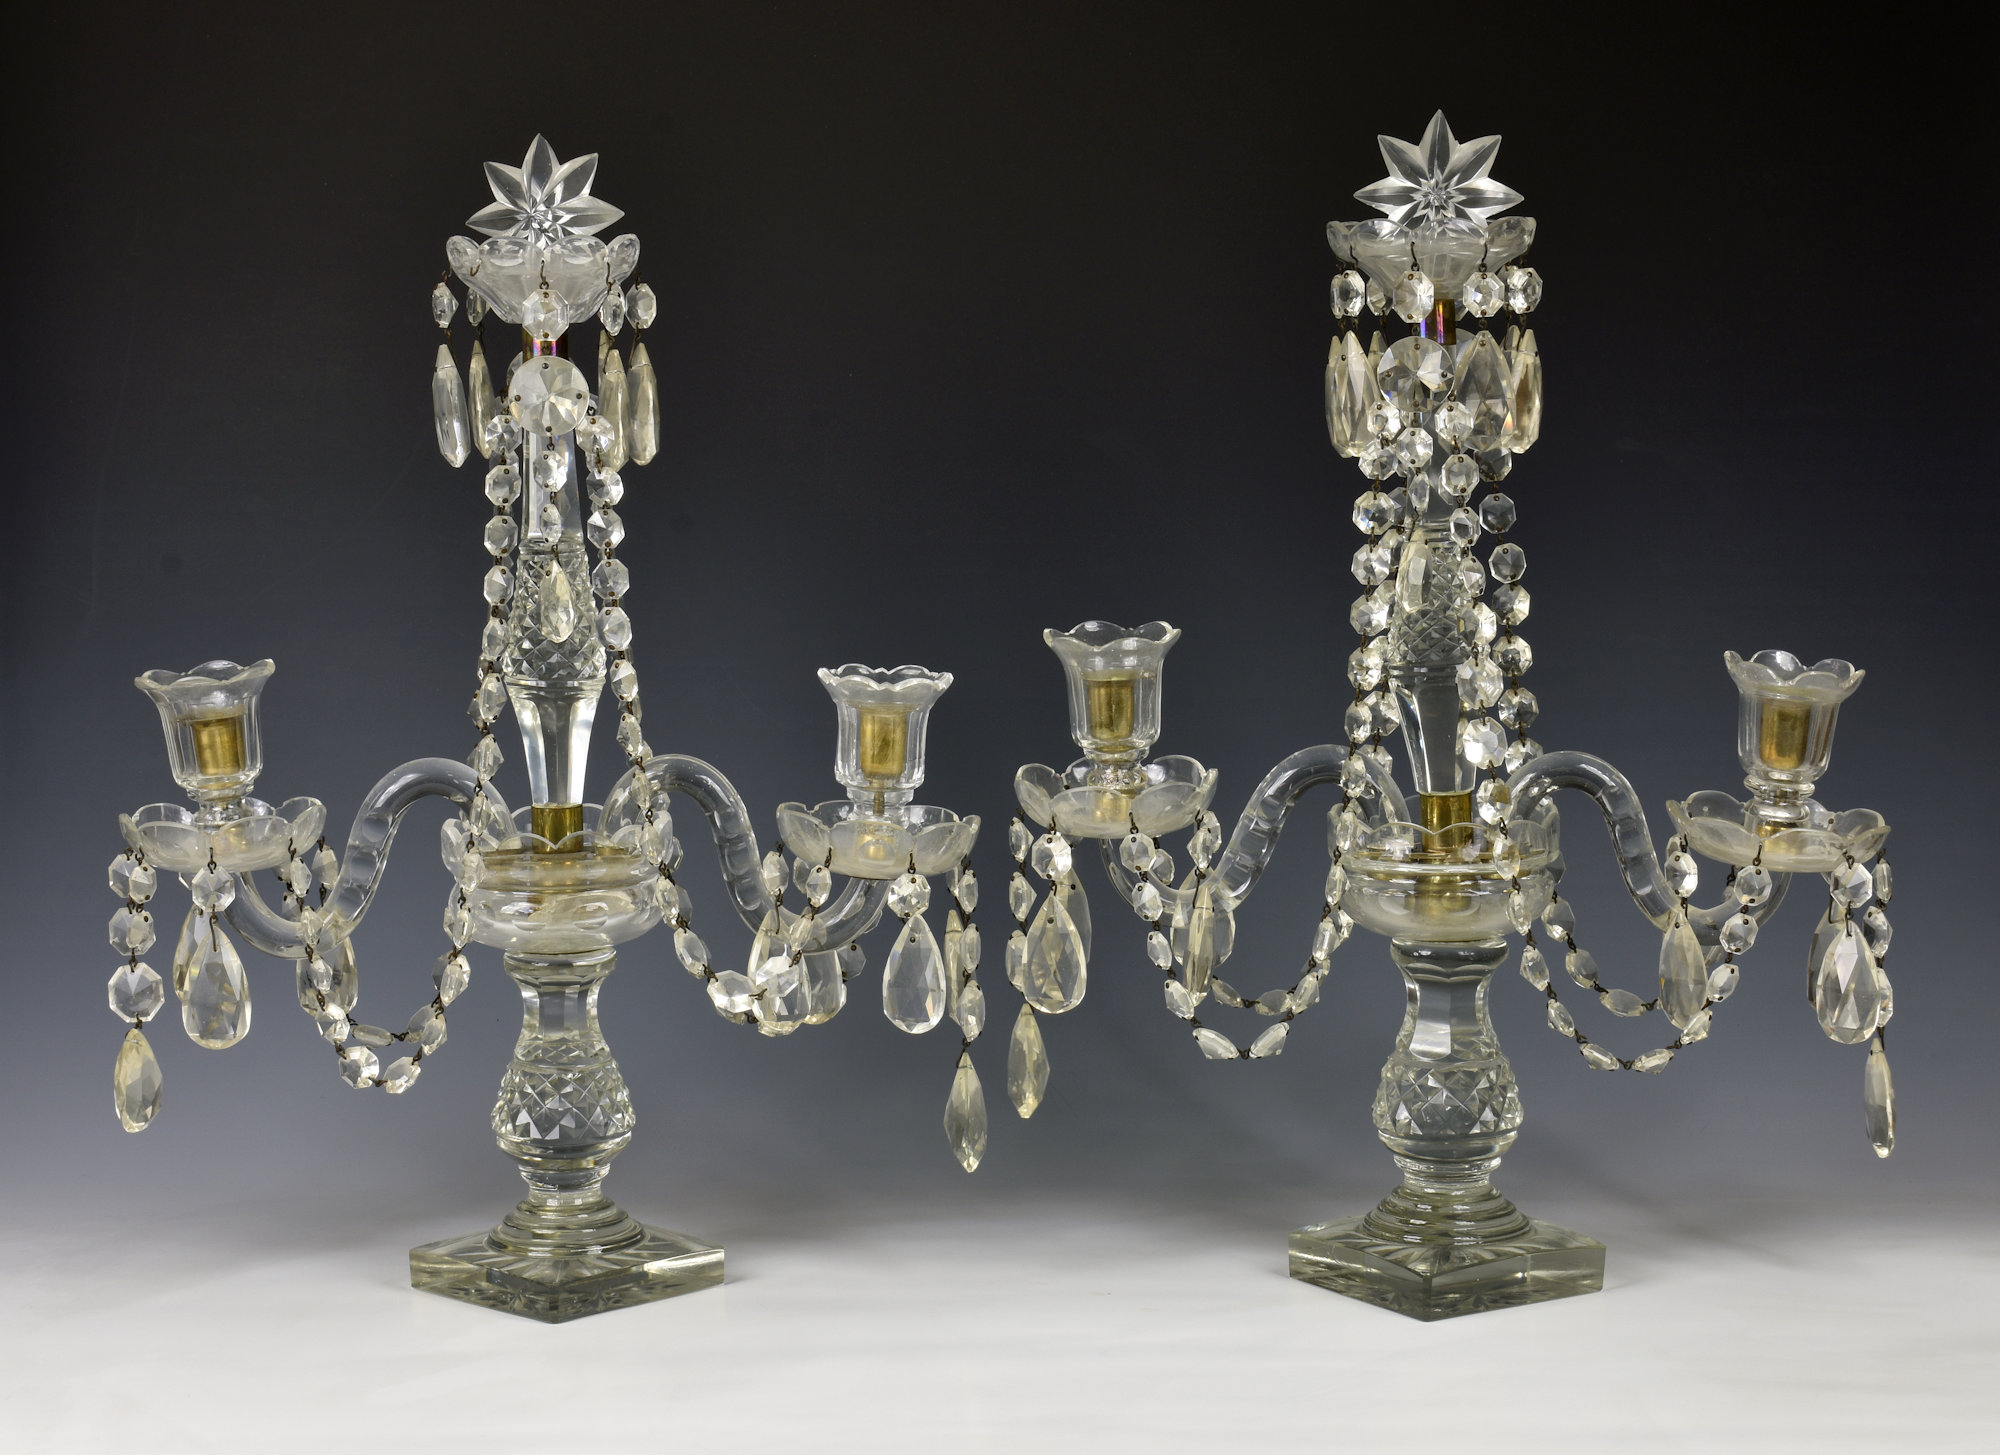 A pair of 19th century style cut glass two light candelabra, mid-20th century, the tall central